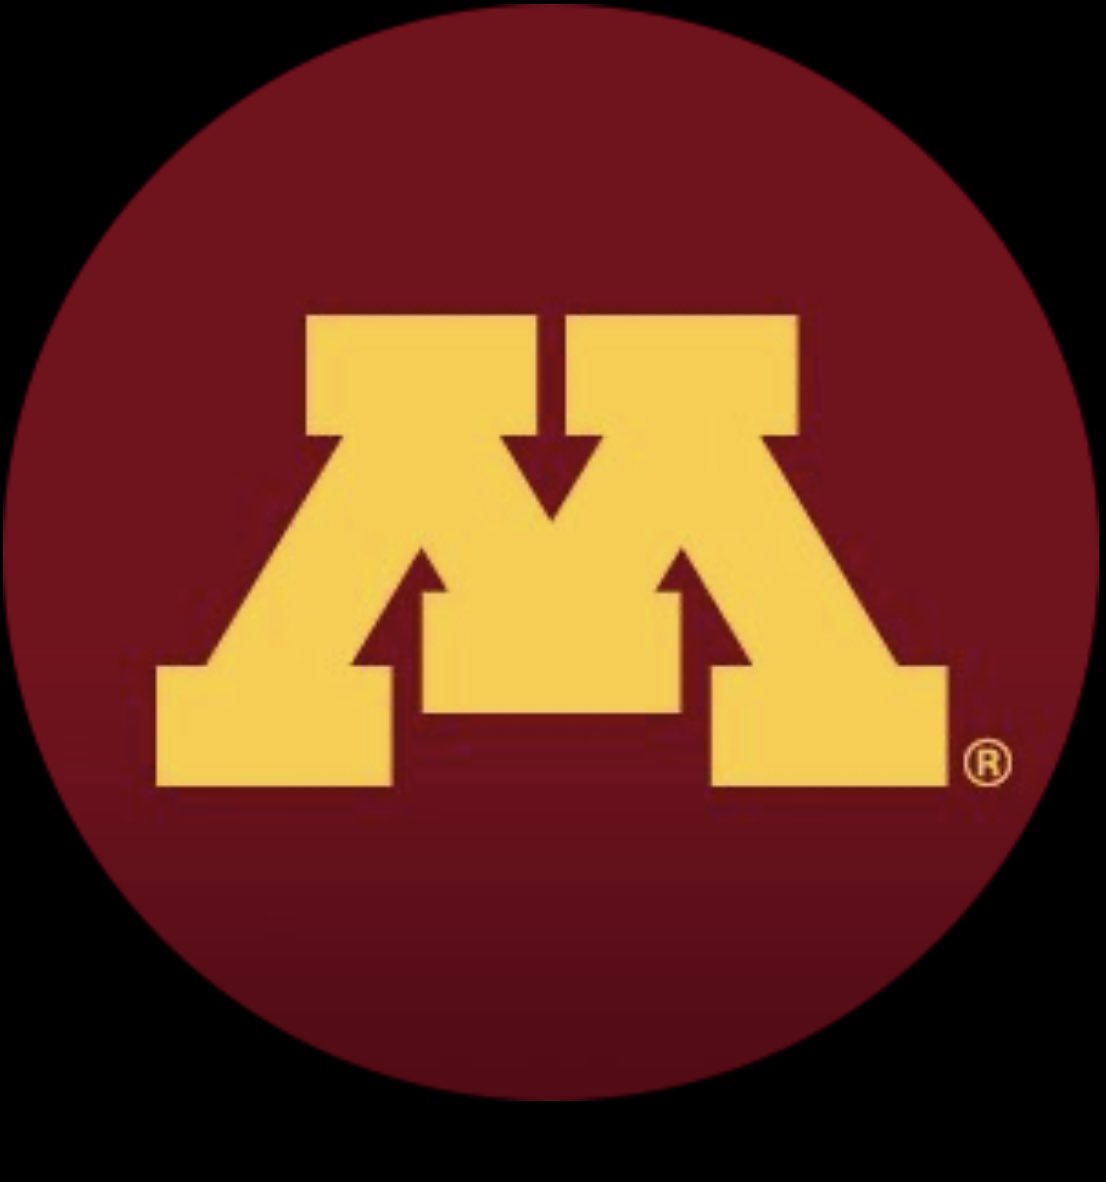 #AGTG After a great workout and conversation with @Callybrian I’m extremely blessed to receive an offer to Minnesota University!!! #GoldenGophers